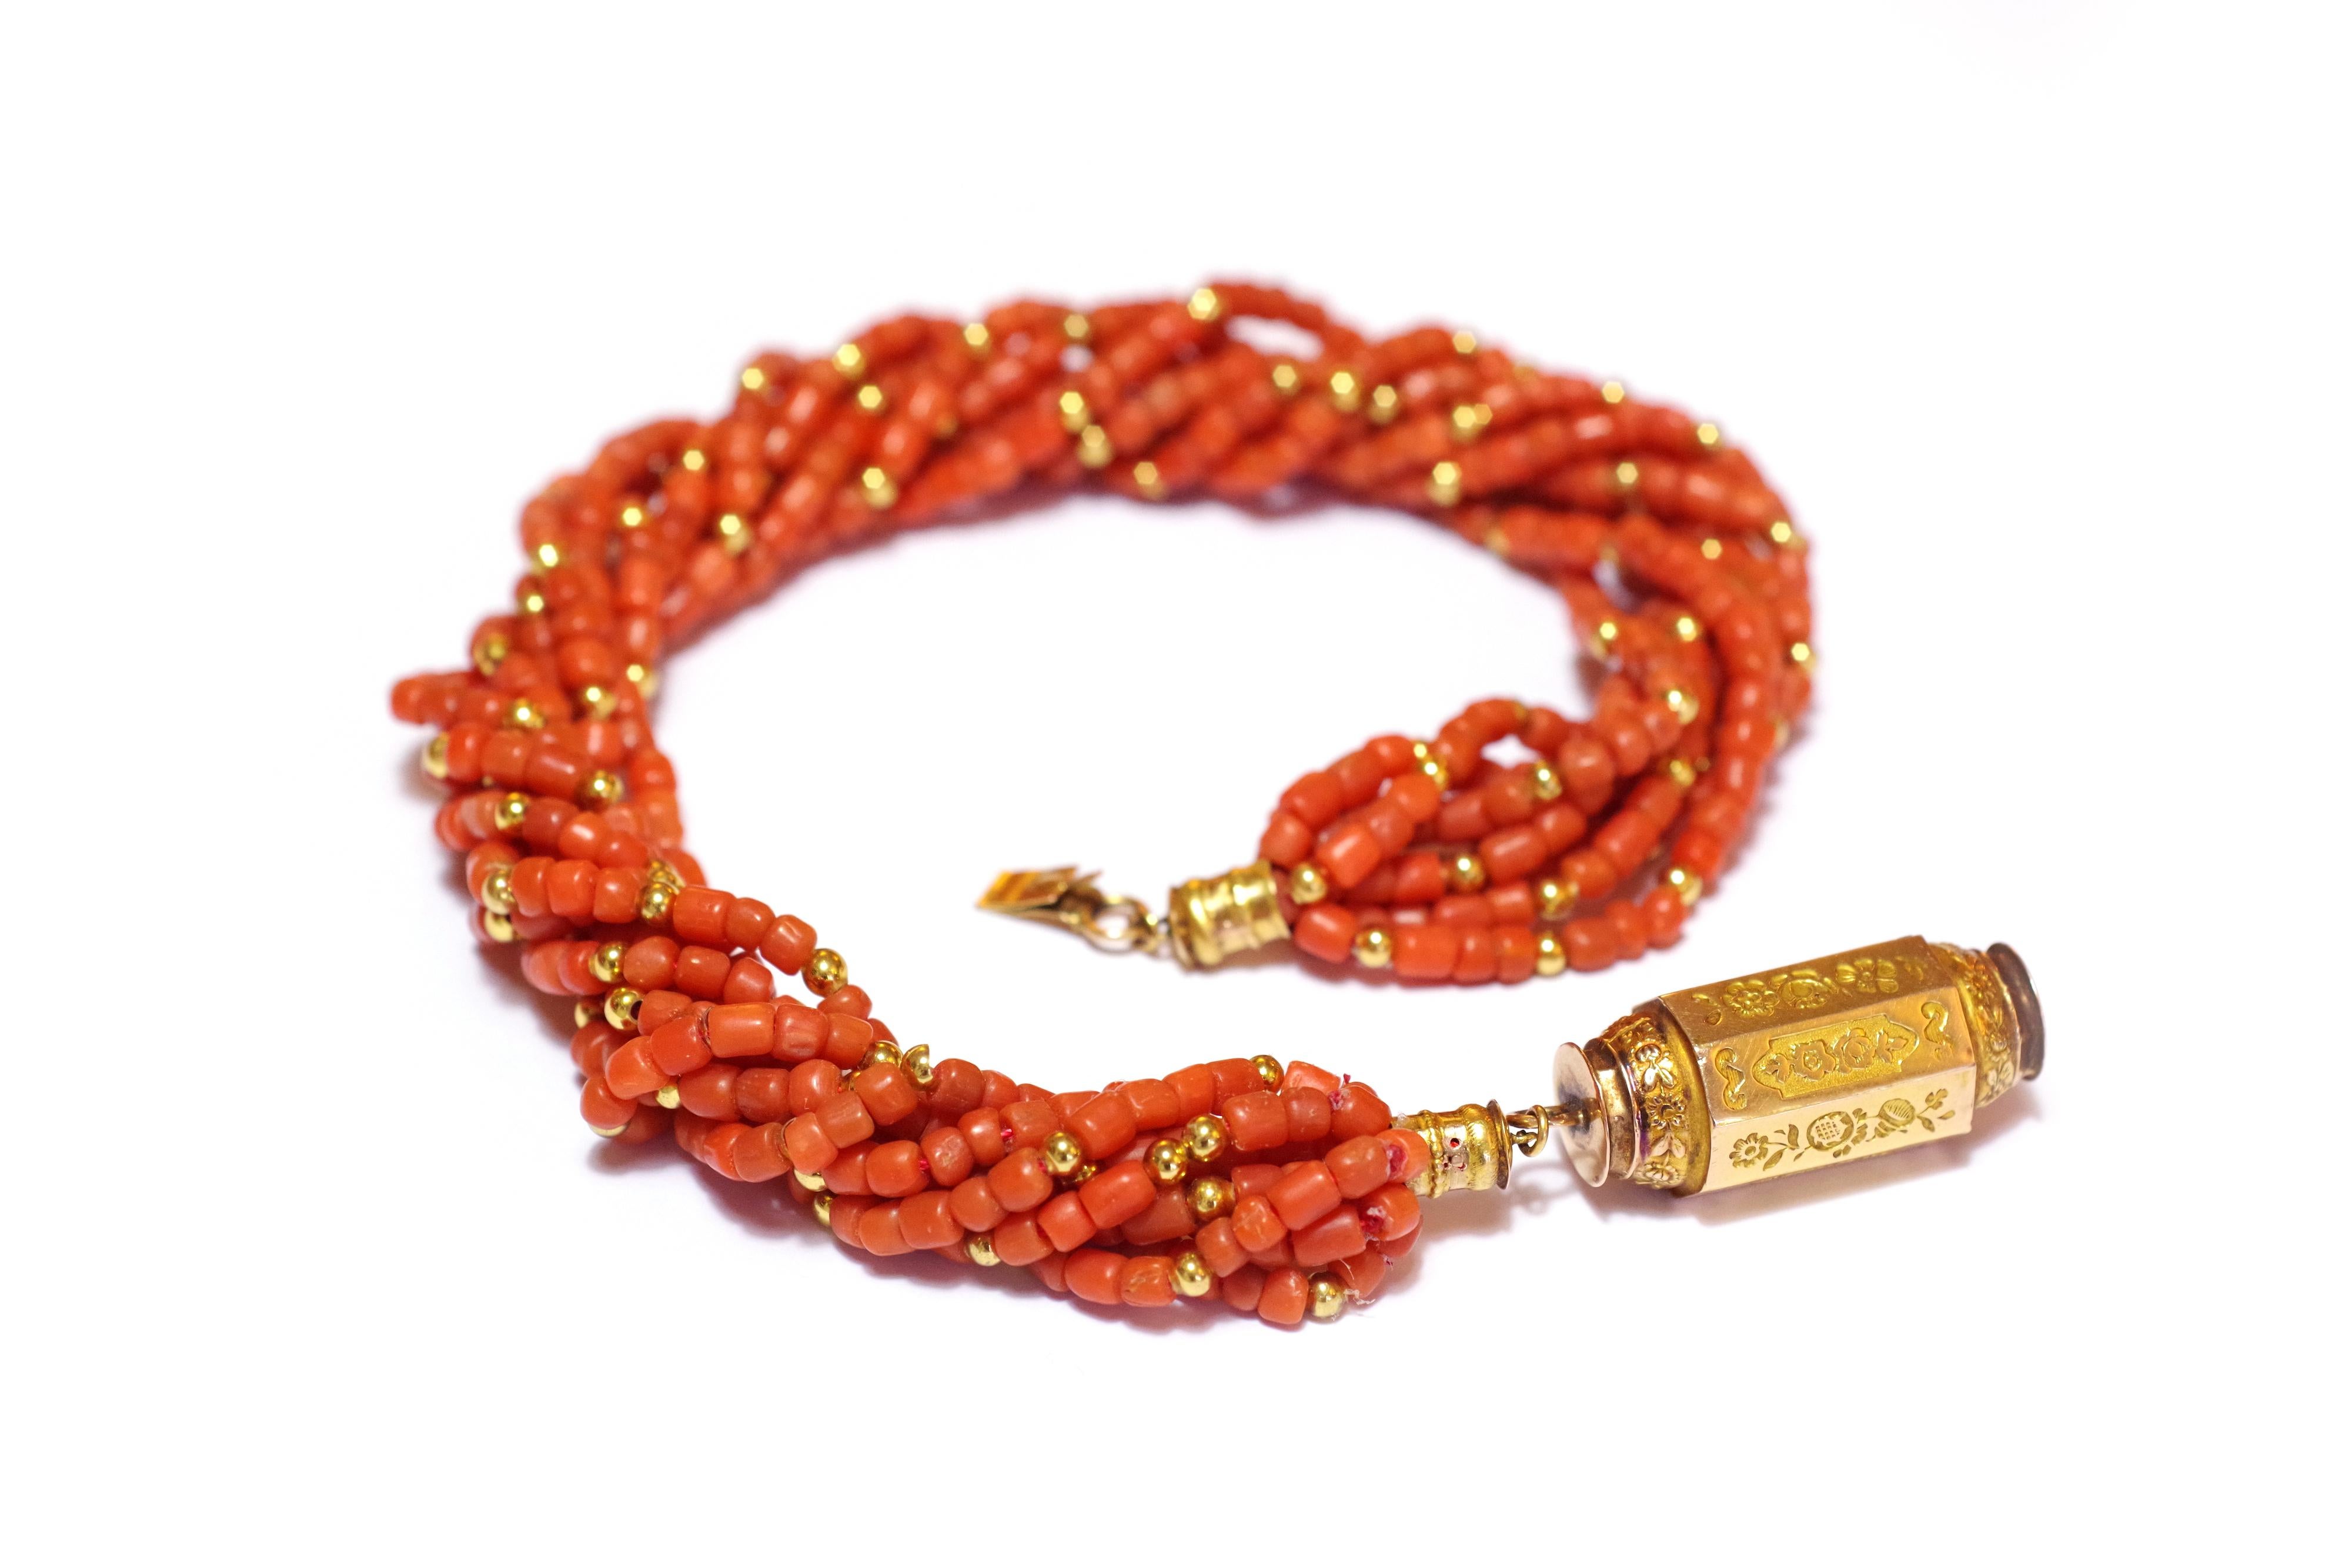 Antique coral choker necklace in 18 karat pink gold. Rare old multi-ranks necklace, this last one is composed of eight rows of pearls of coral strewn with golden pearls. The necklace is decorated with an important antique barrel clasp in 18 karat